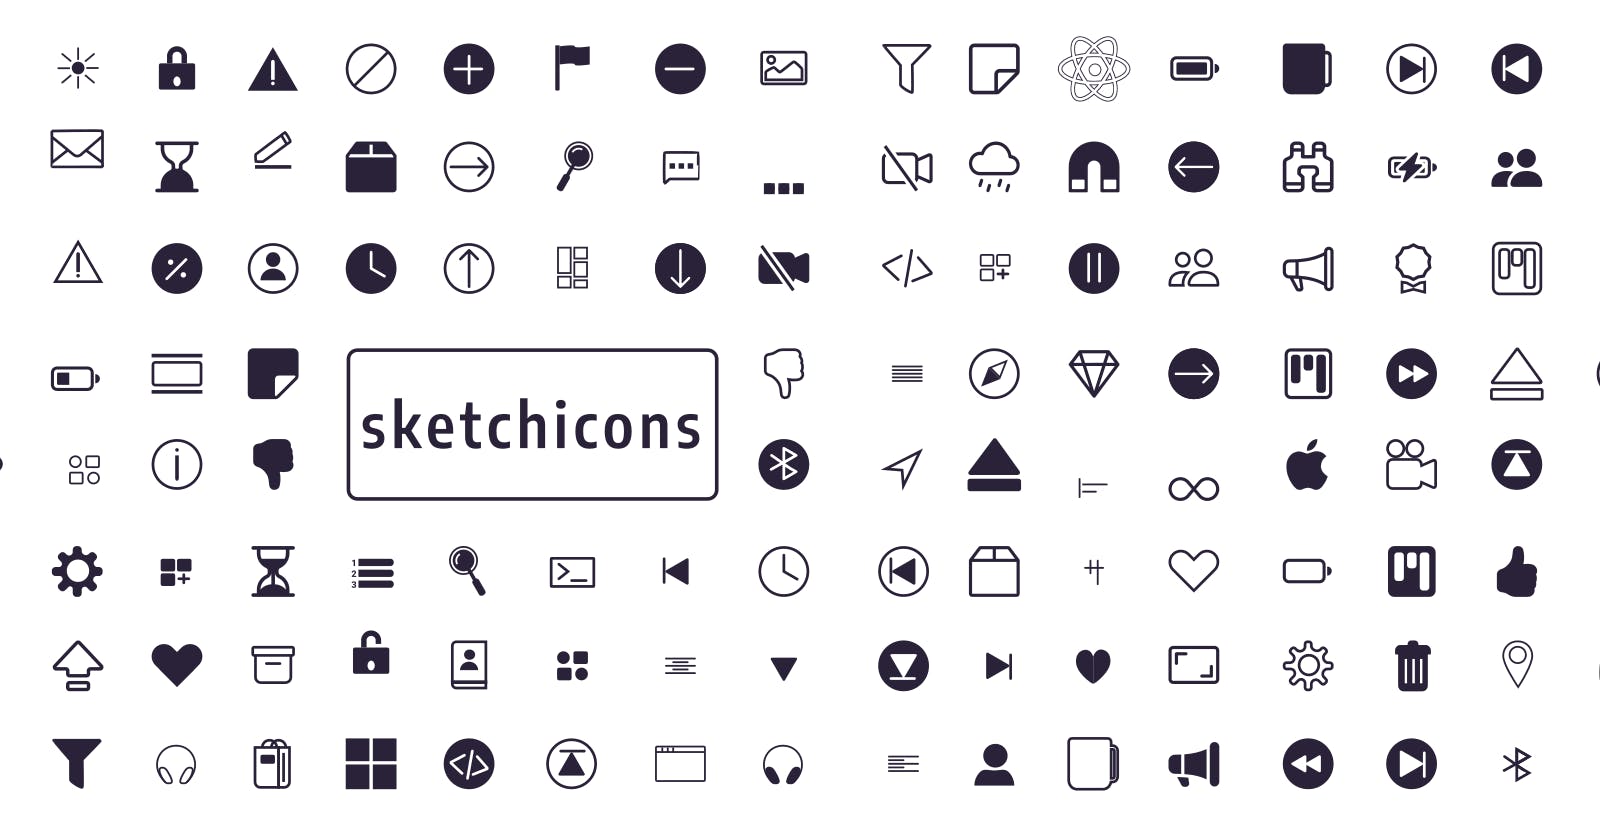 Sketch-icons makes it simple to import icons